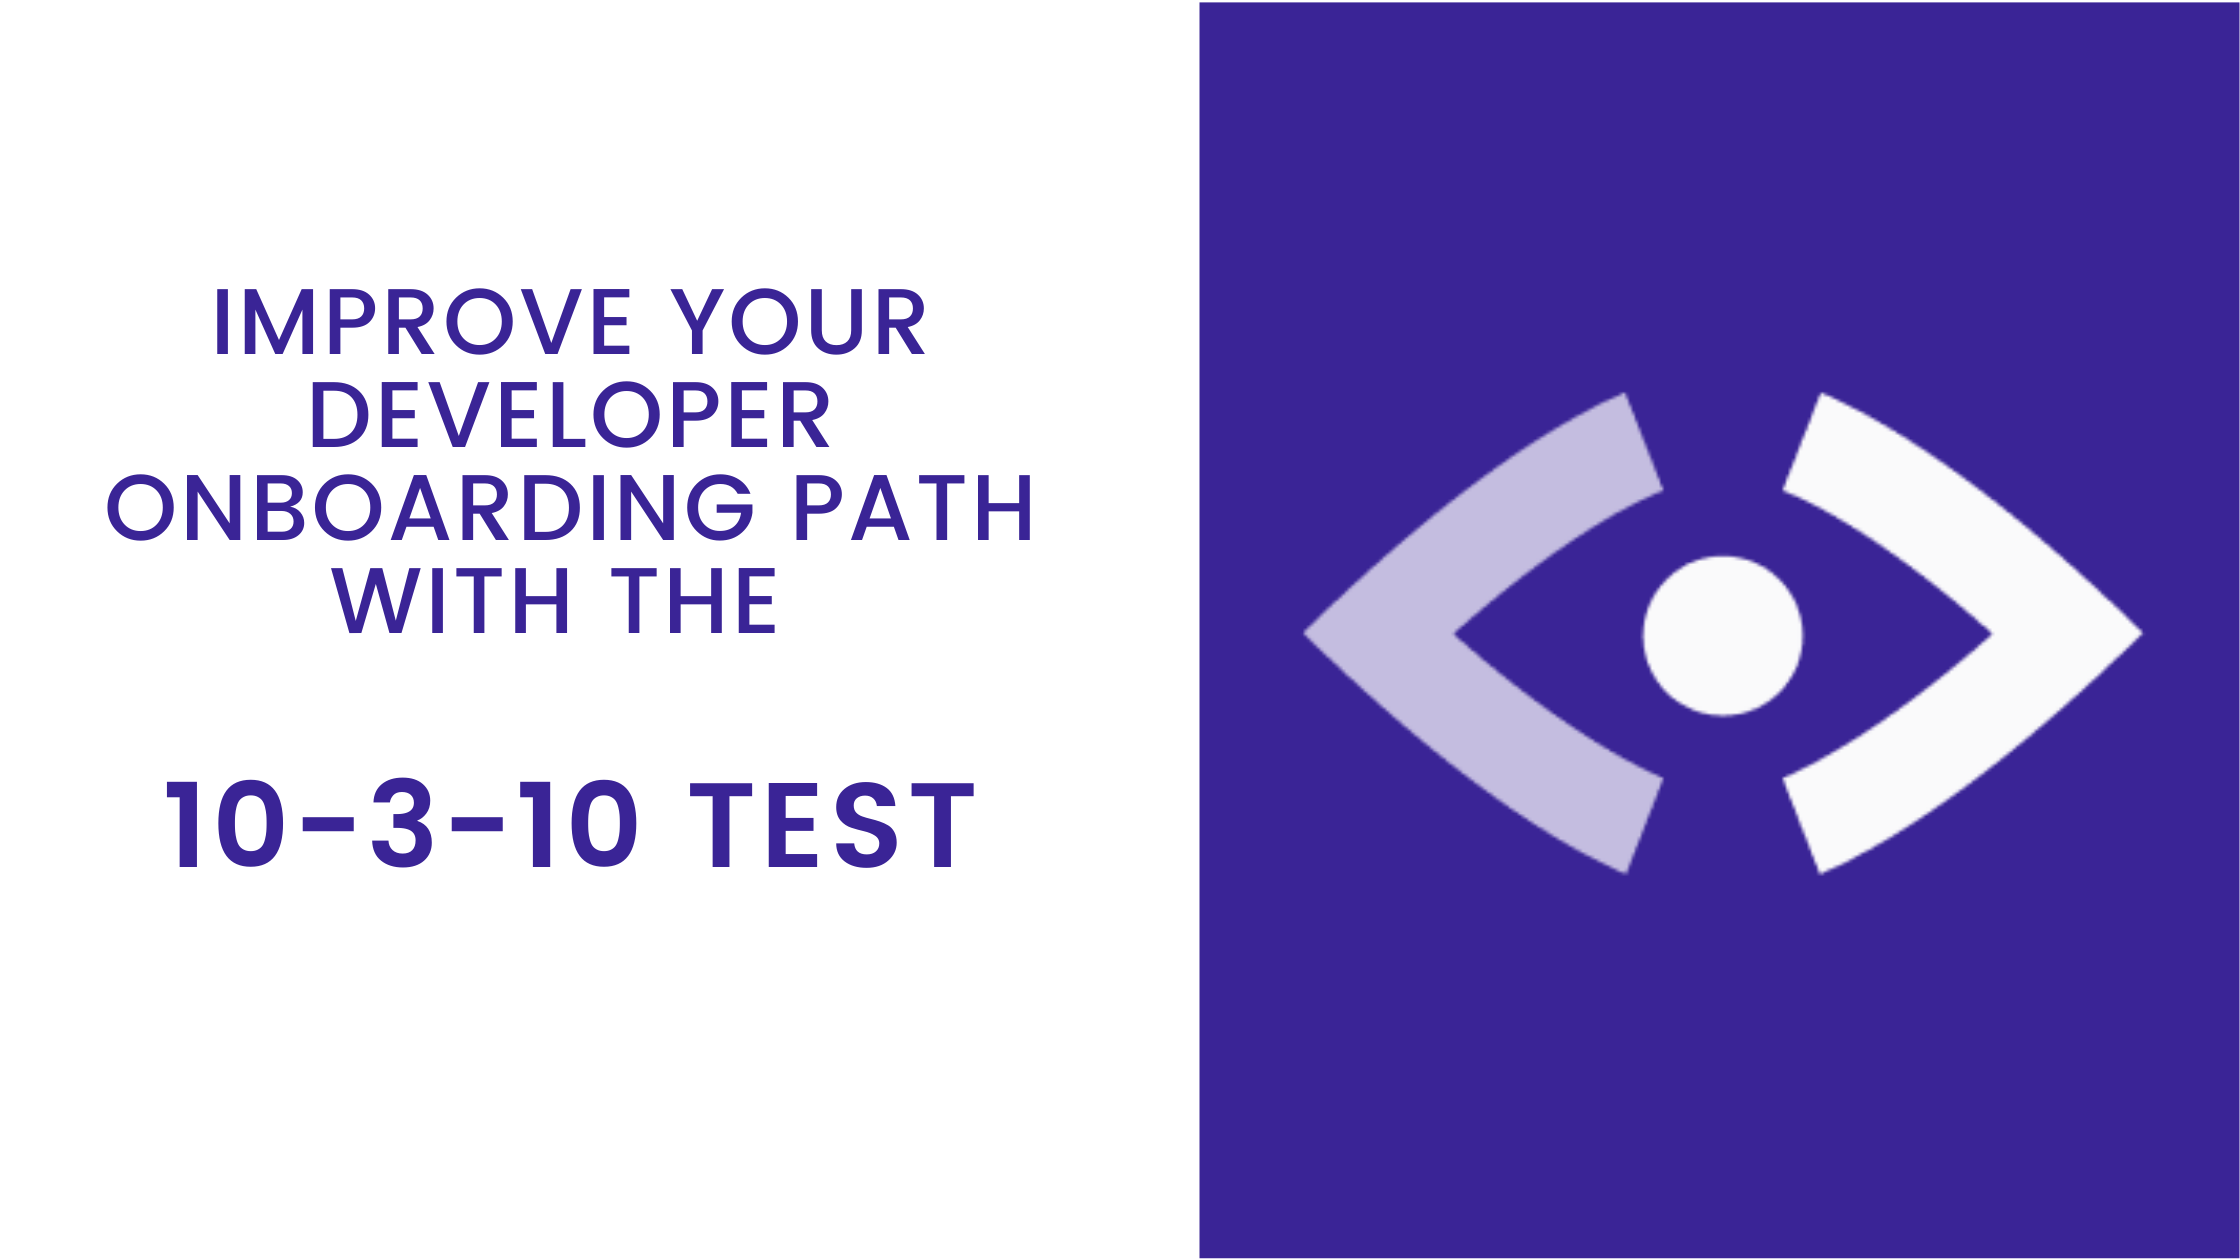 Improve Your Developer Onboarding Path With the 10-3-10 Test